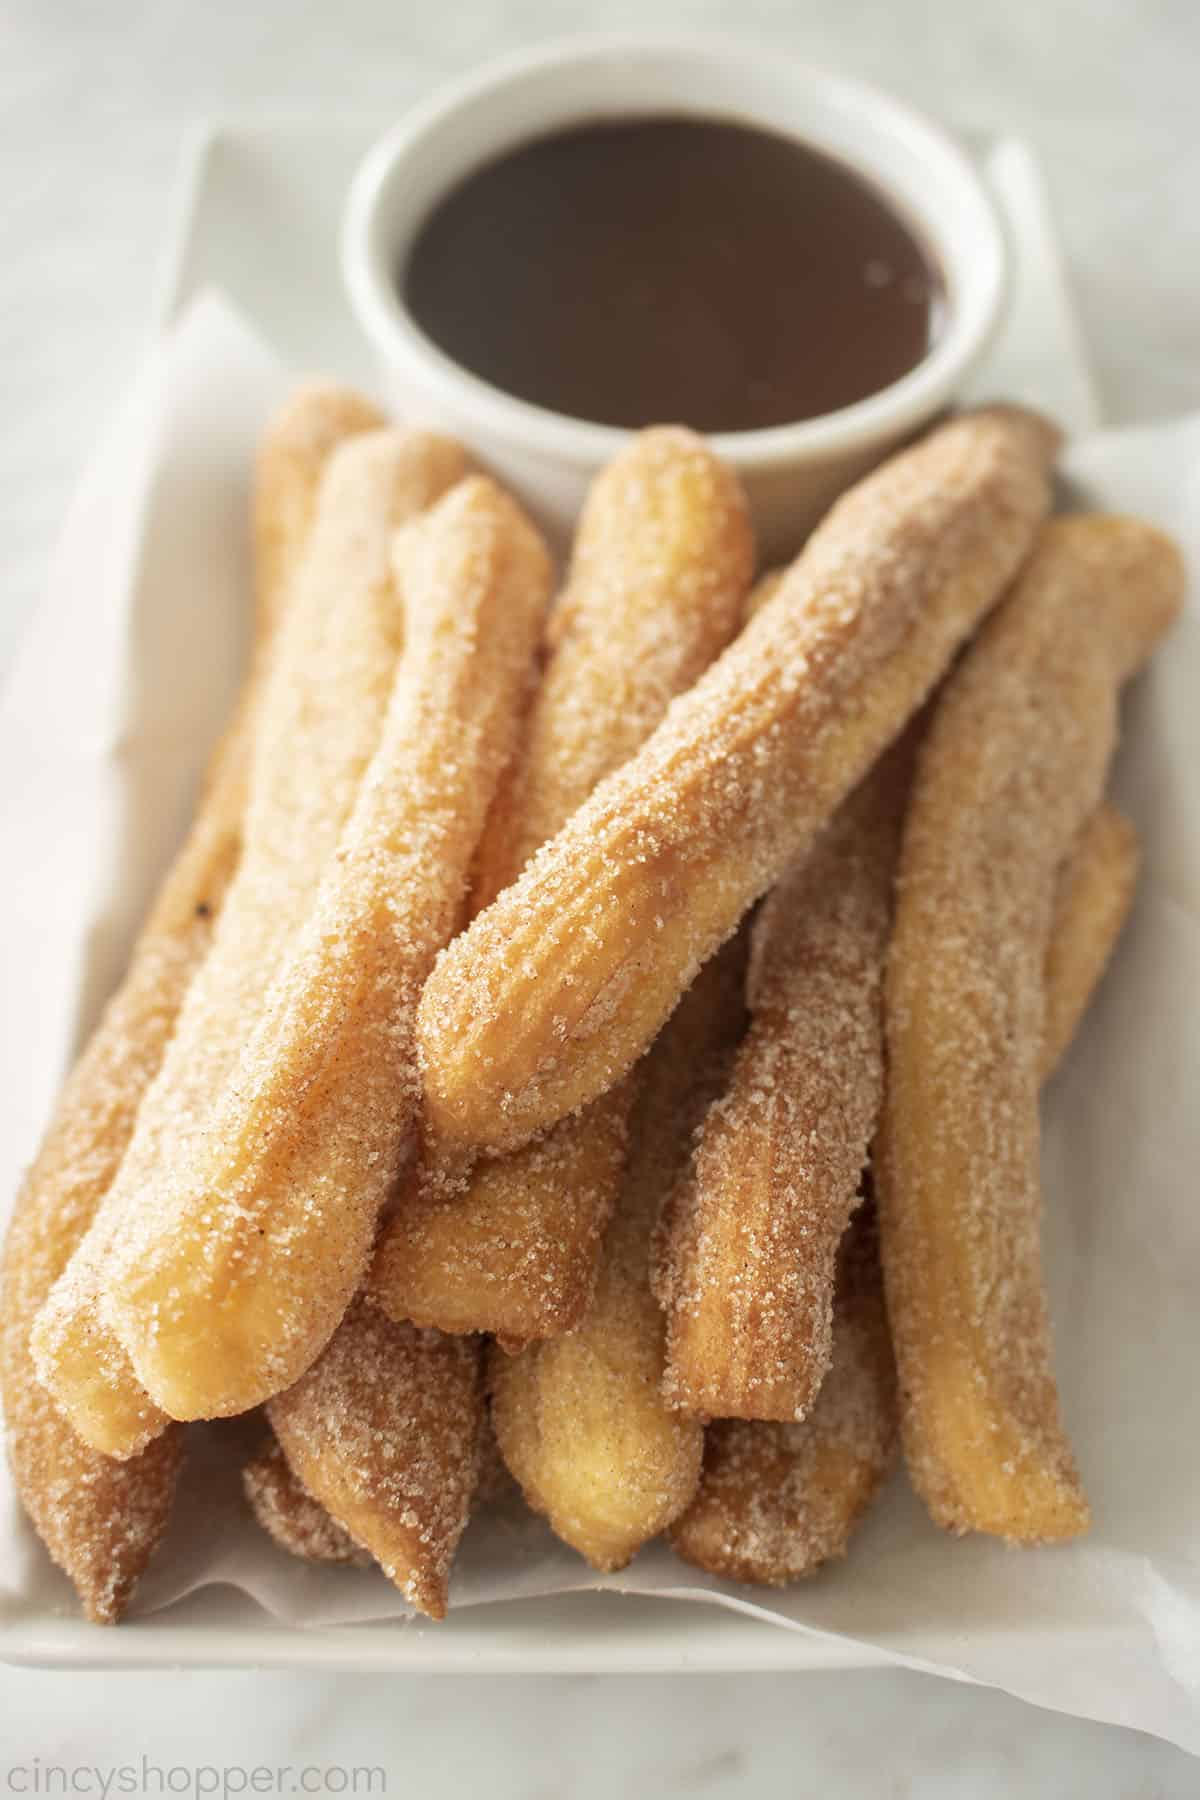 Fried authentic Mexican Churros on a white platter with chocolate dipping sauce.